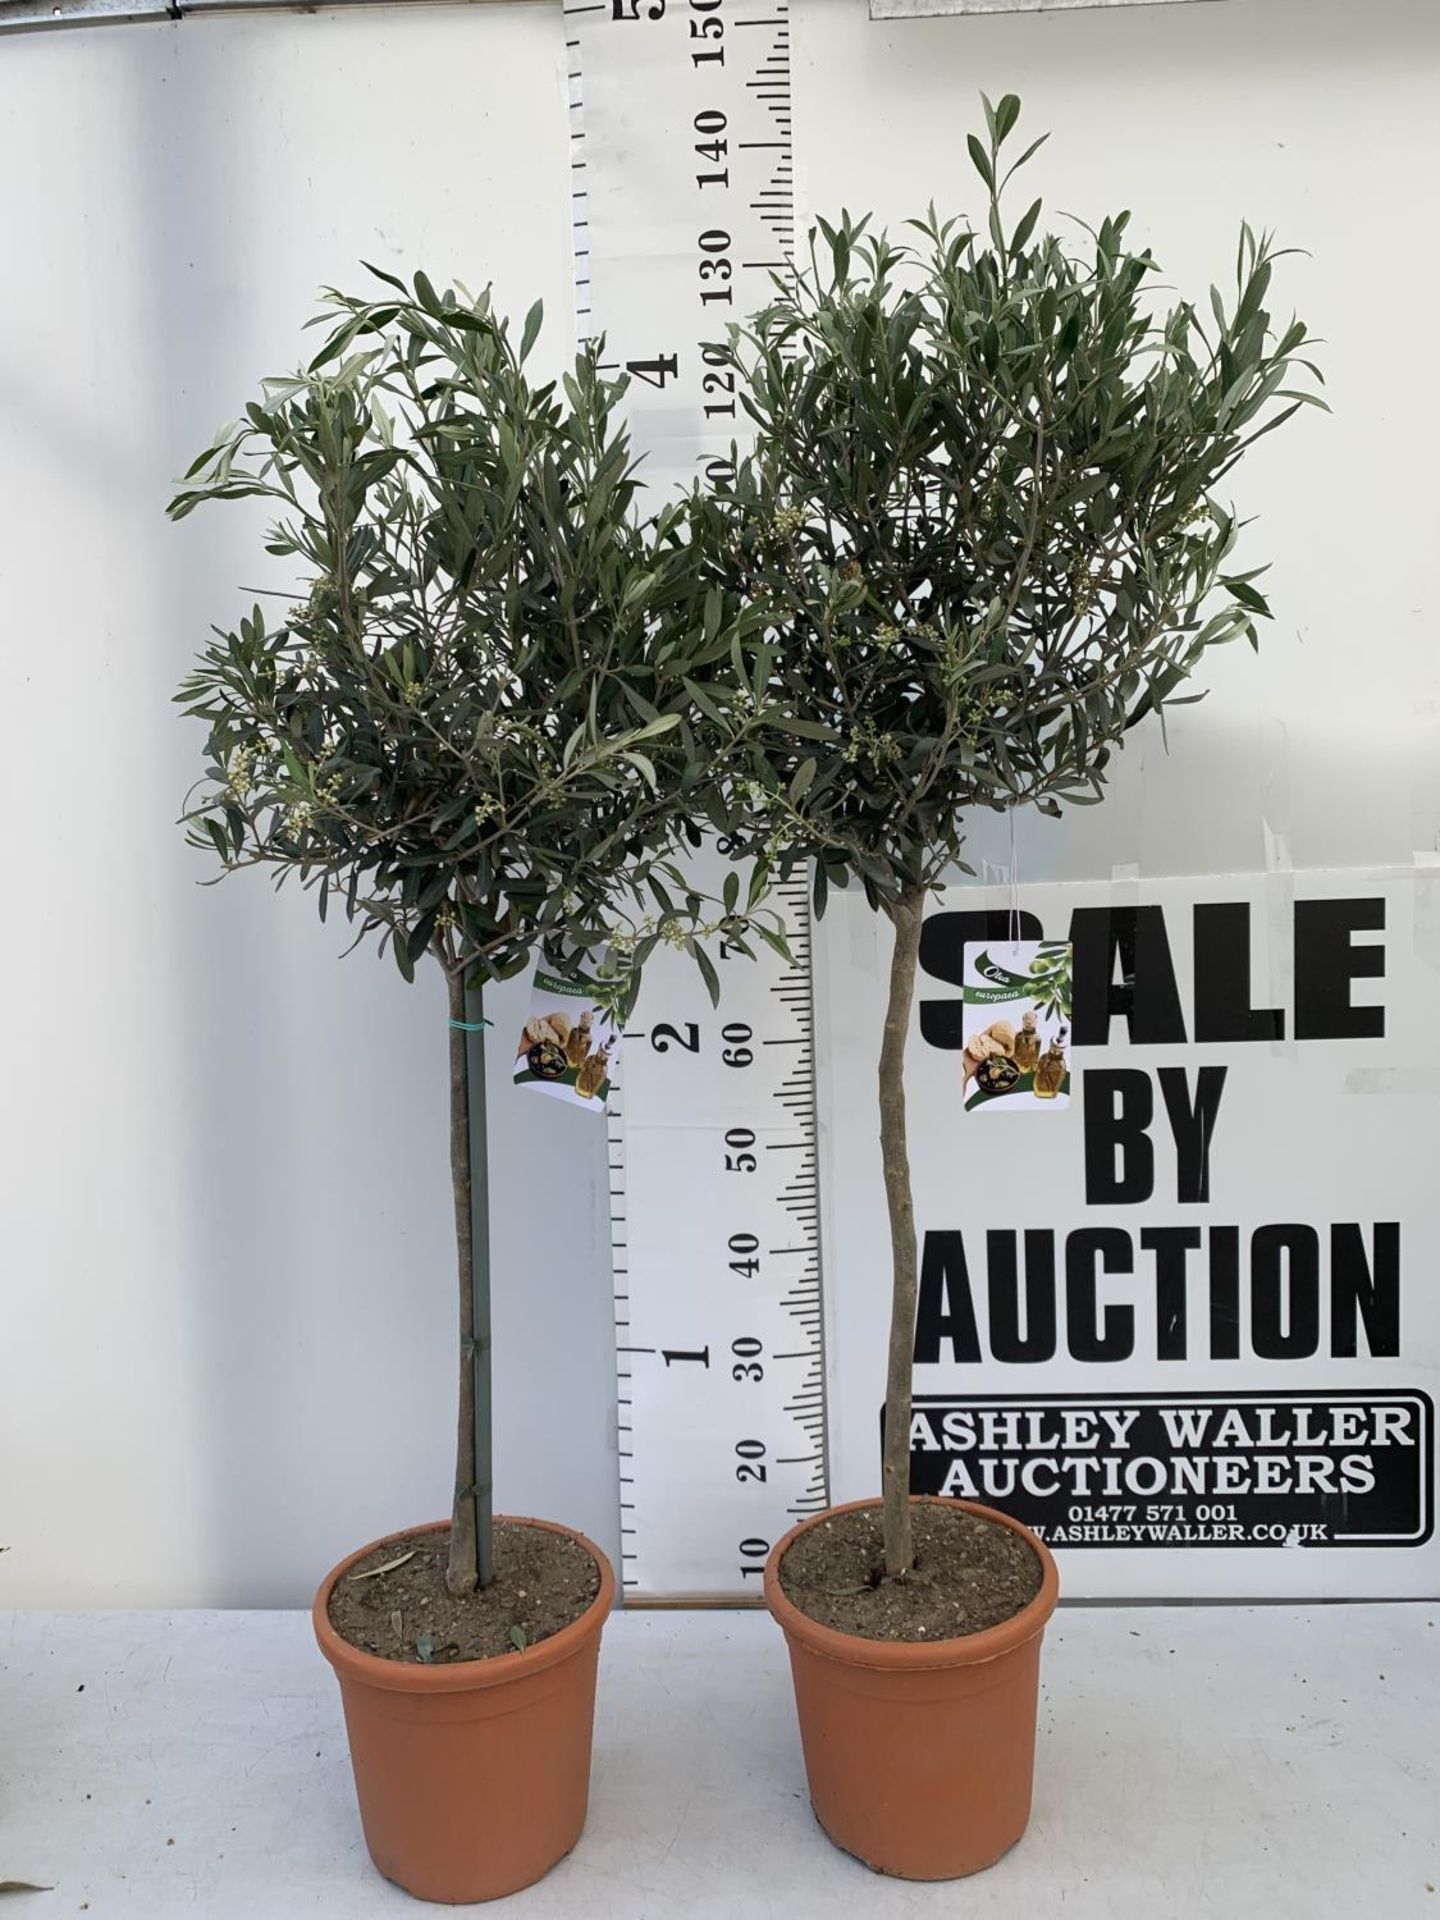 TWO OLIVE EUROPEA STANDARD TREES APPROX 120CM IN HEIGHT IN 3LTR POTS NO VAT TO BE SOLD FOR THE TWO - Image 2 of 9